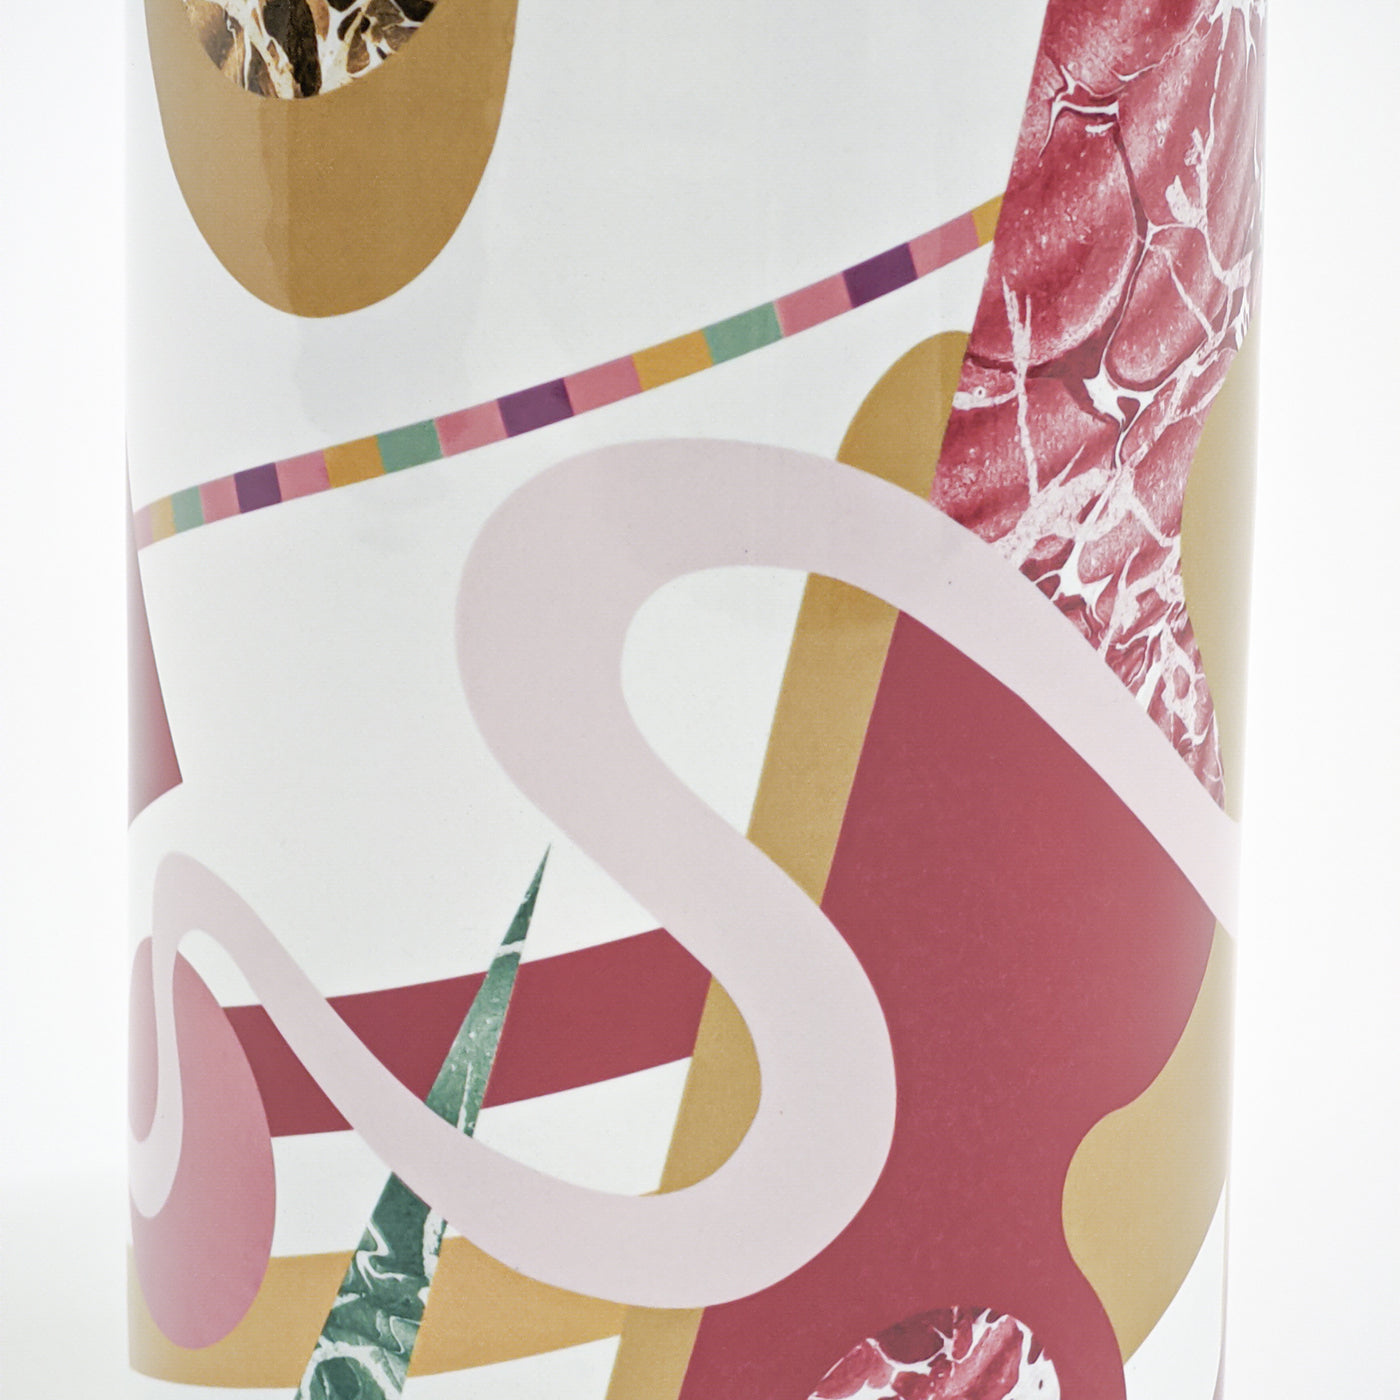 Alchimie Cylindrical Ceramic Vase with Abstract Decor - Alternative view 3